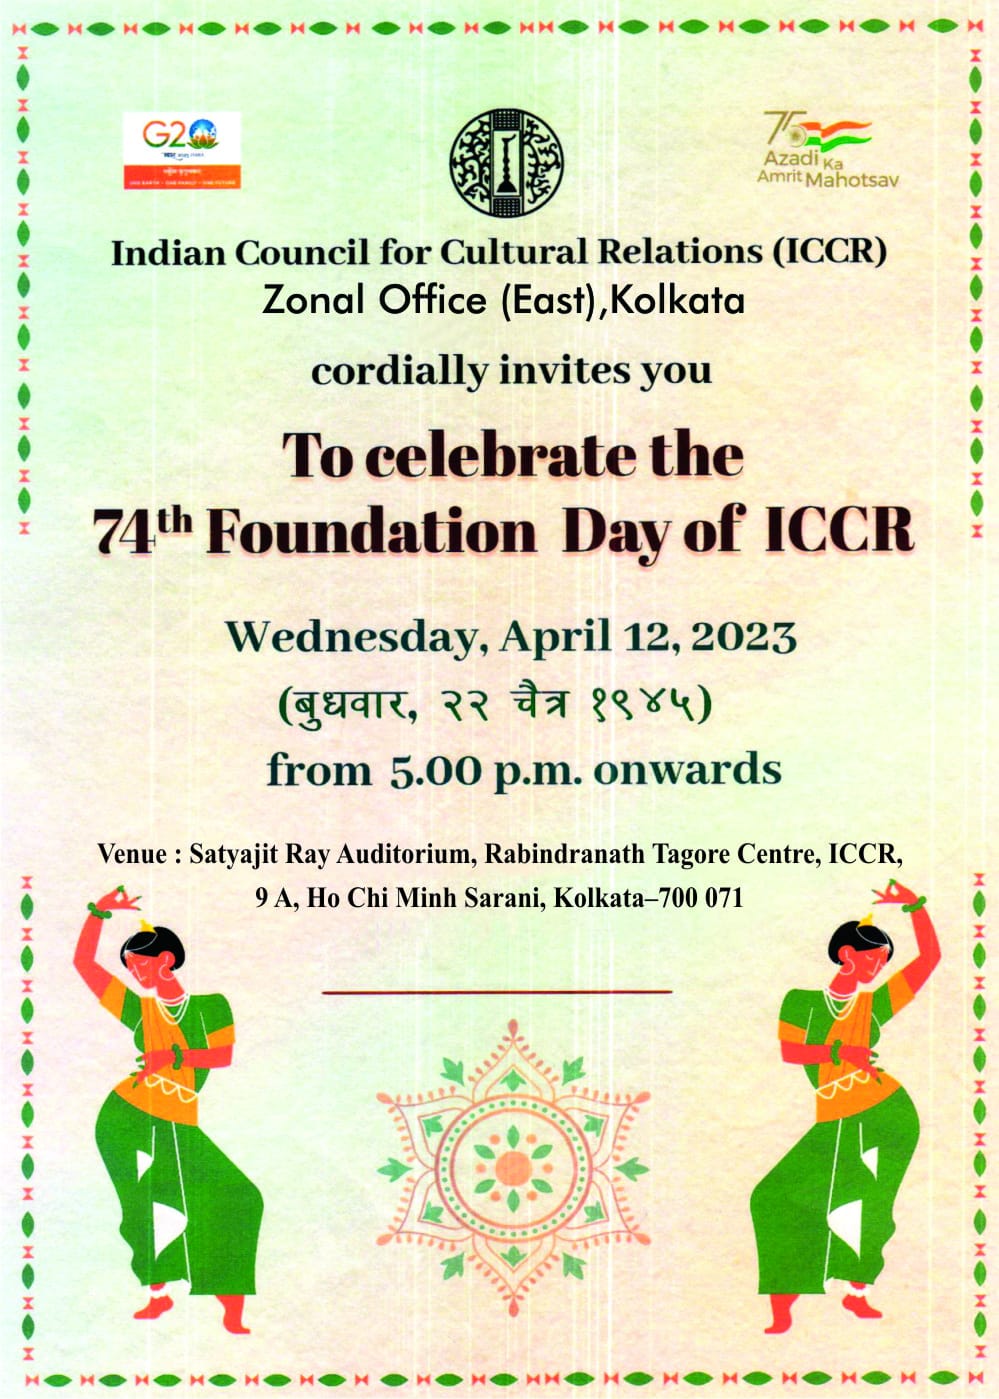 ICCR, Zonal Office (East), Kolkata is organizing a Cultural Evening to celebrate 74th Foundation Day of ICCR